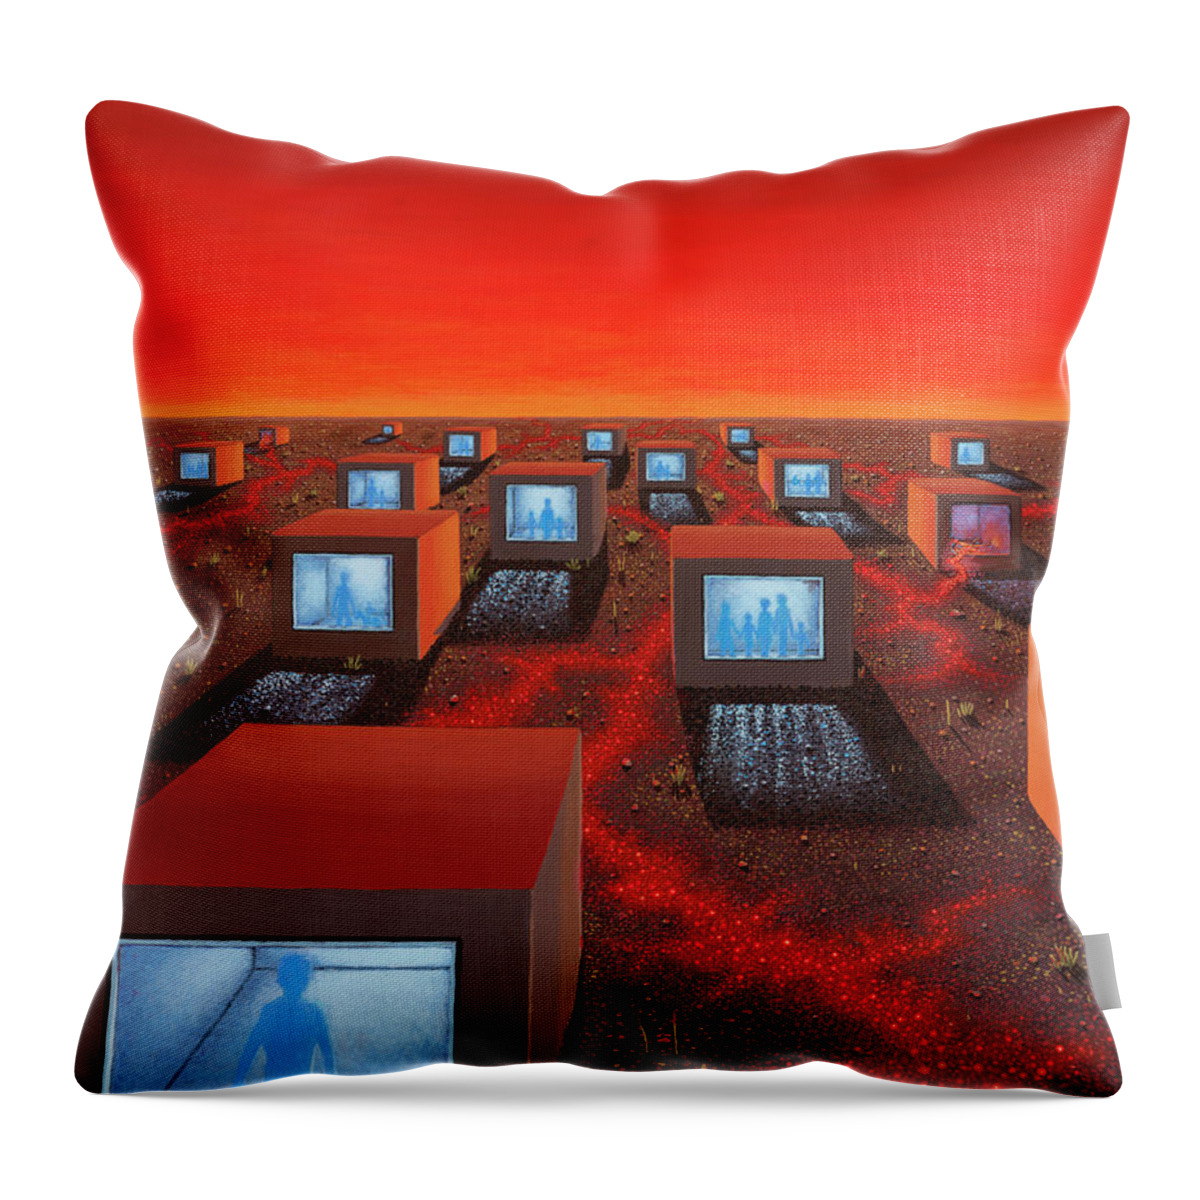 Surreal Throw Pillow featuring the painting Nineteen by Jon Carroll Otterson